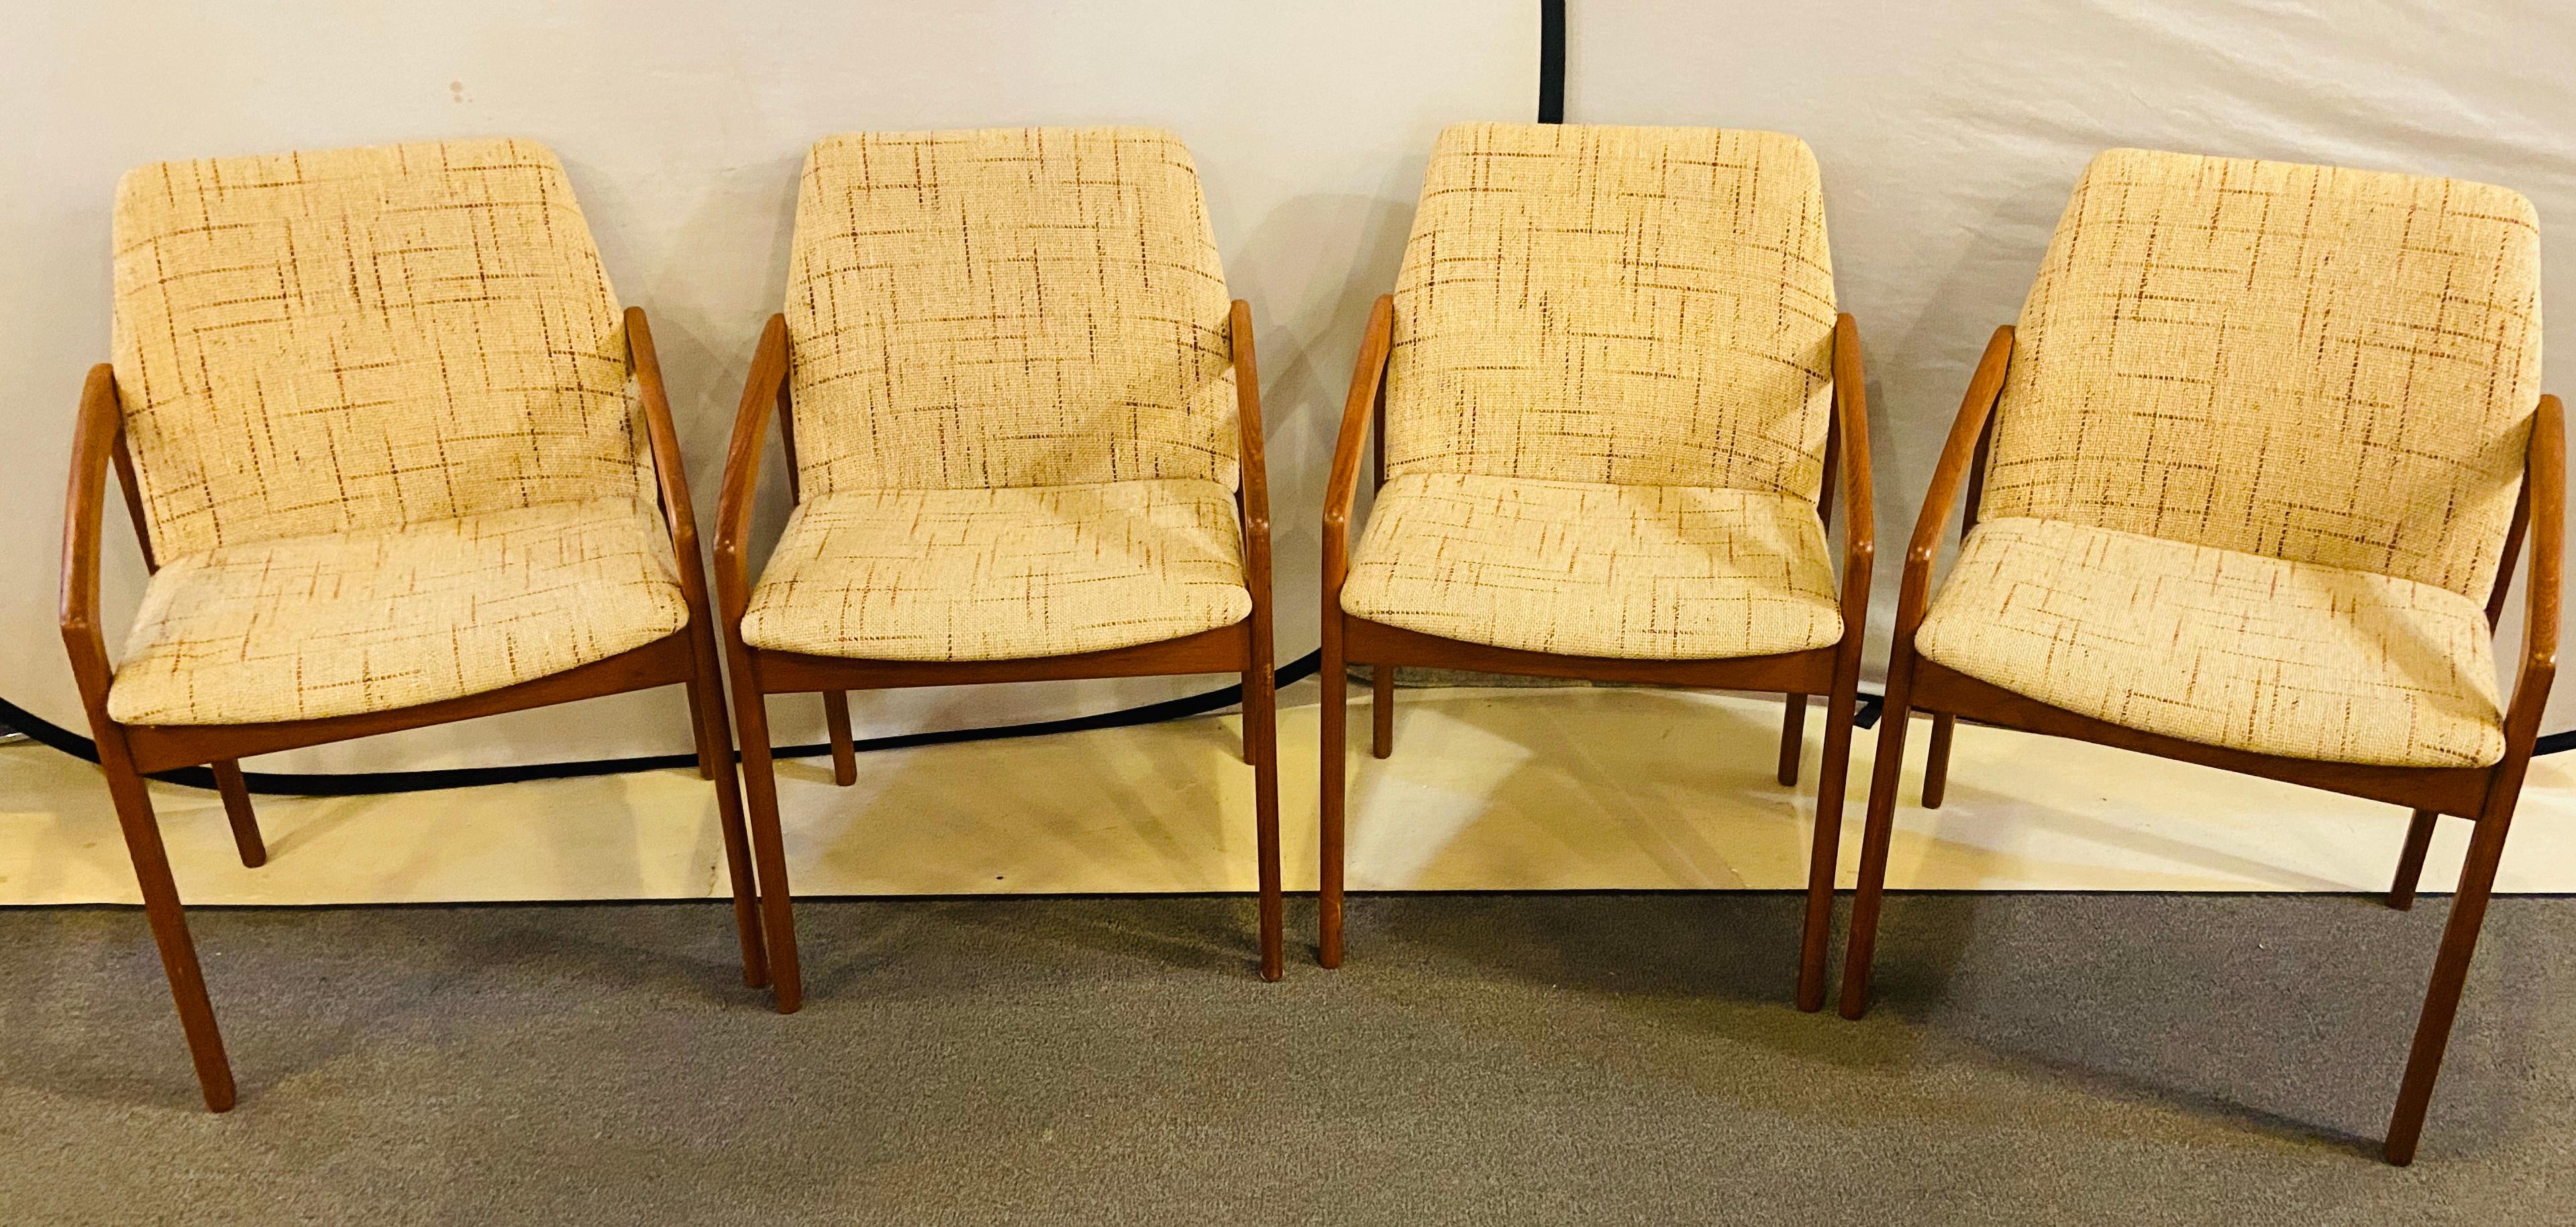 Mid-20th Century 1950s Mid-Century Modern Danish Teak Dining or Side Chairs, Set of Four